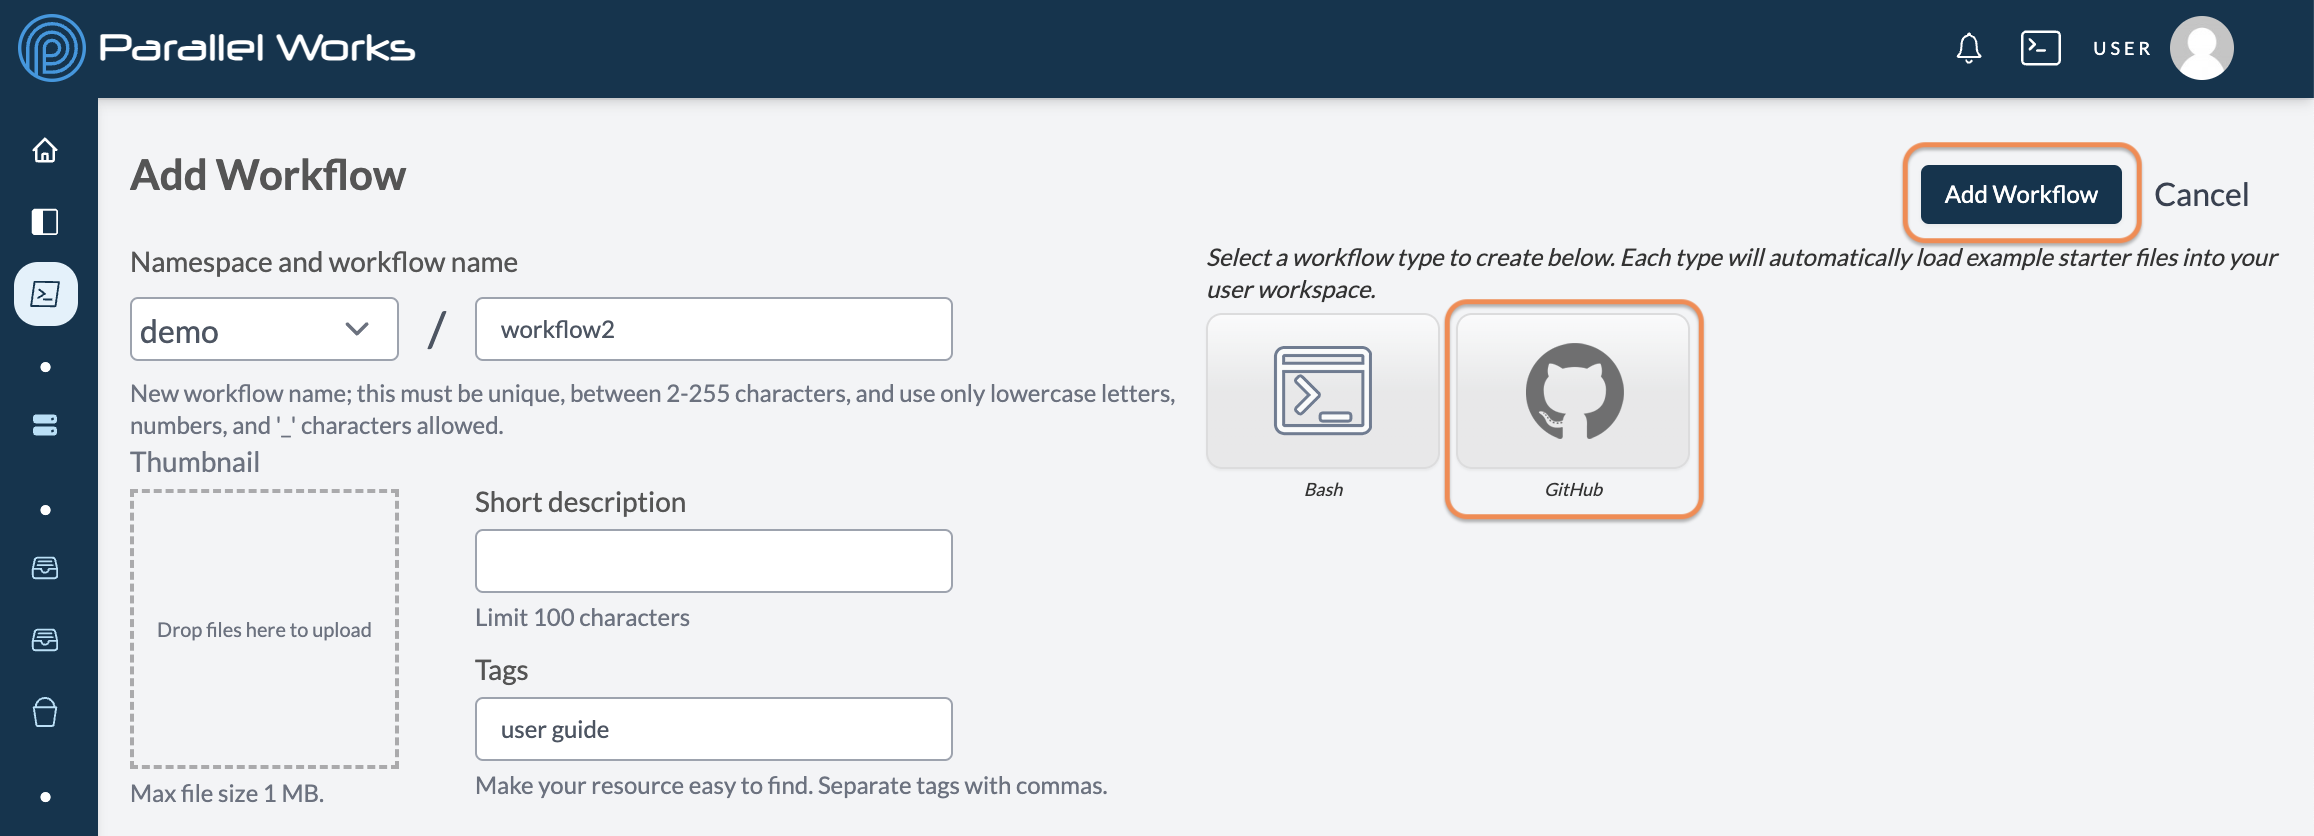 Screenshot of the user selecting a GitHub workflow and clicking Add Workflow.